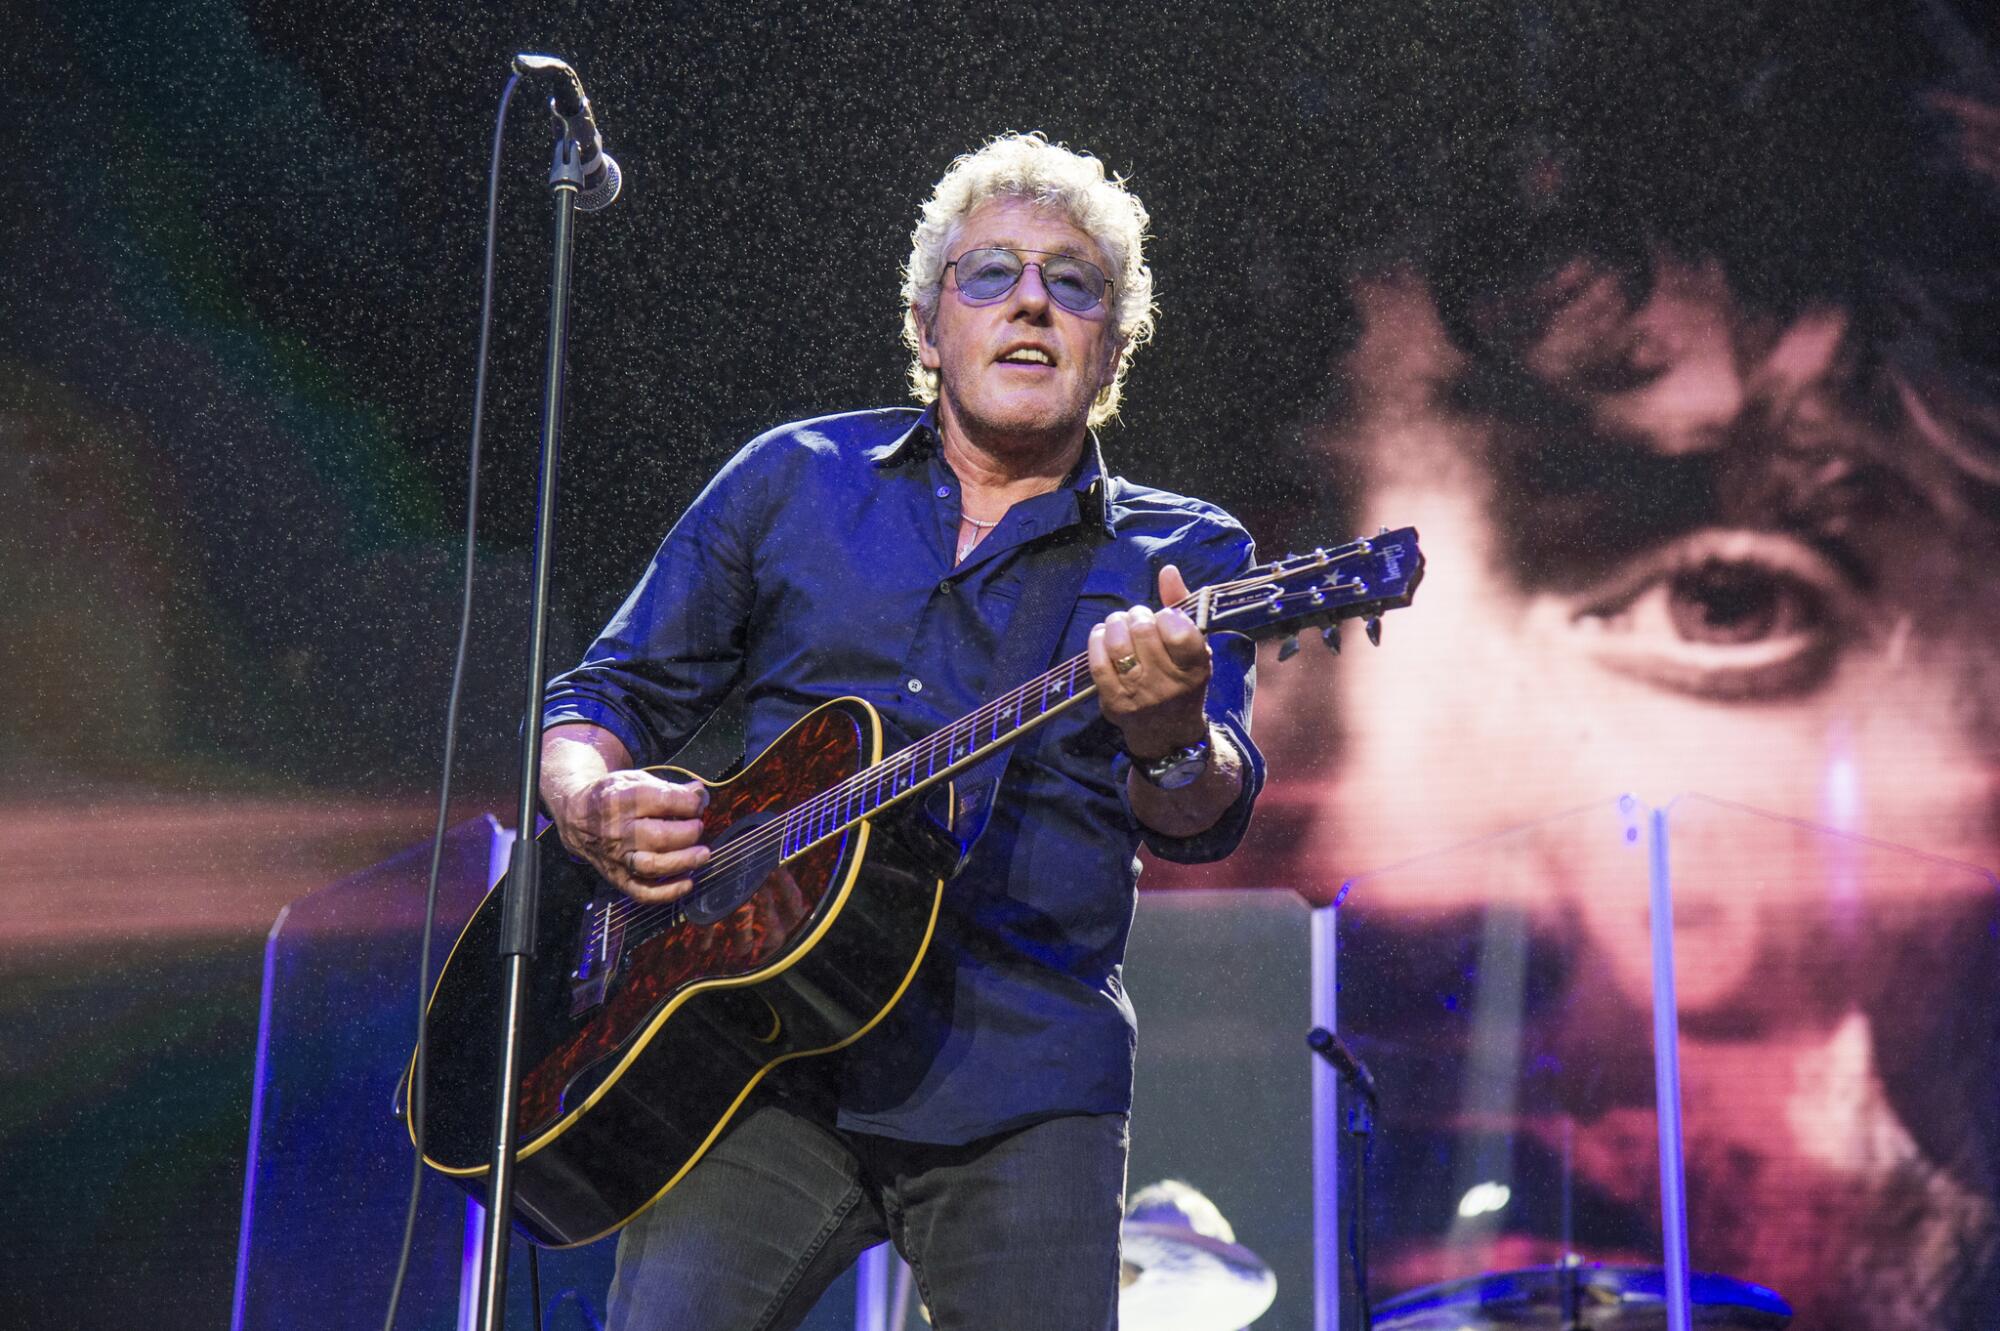 Roger Daltrey of The Who performs at the 2017 Outside Lands Music Festival